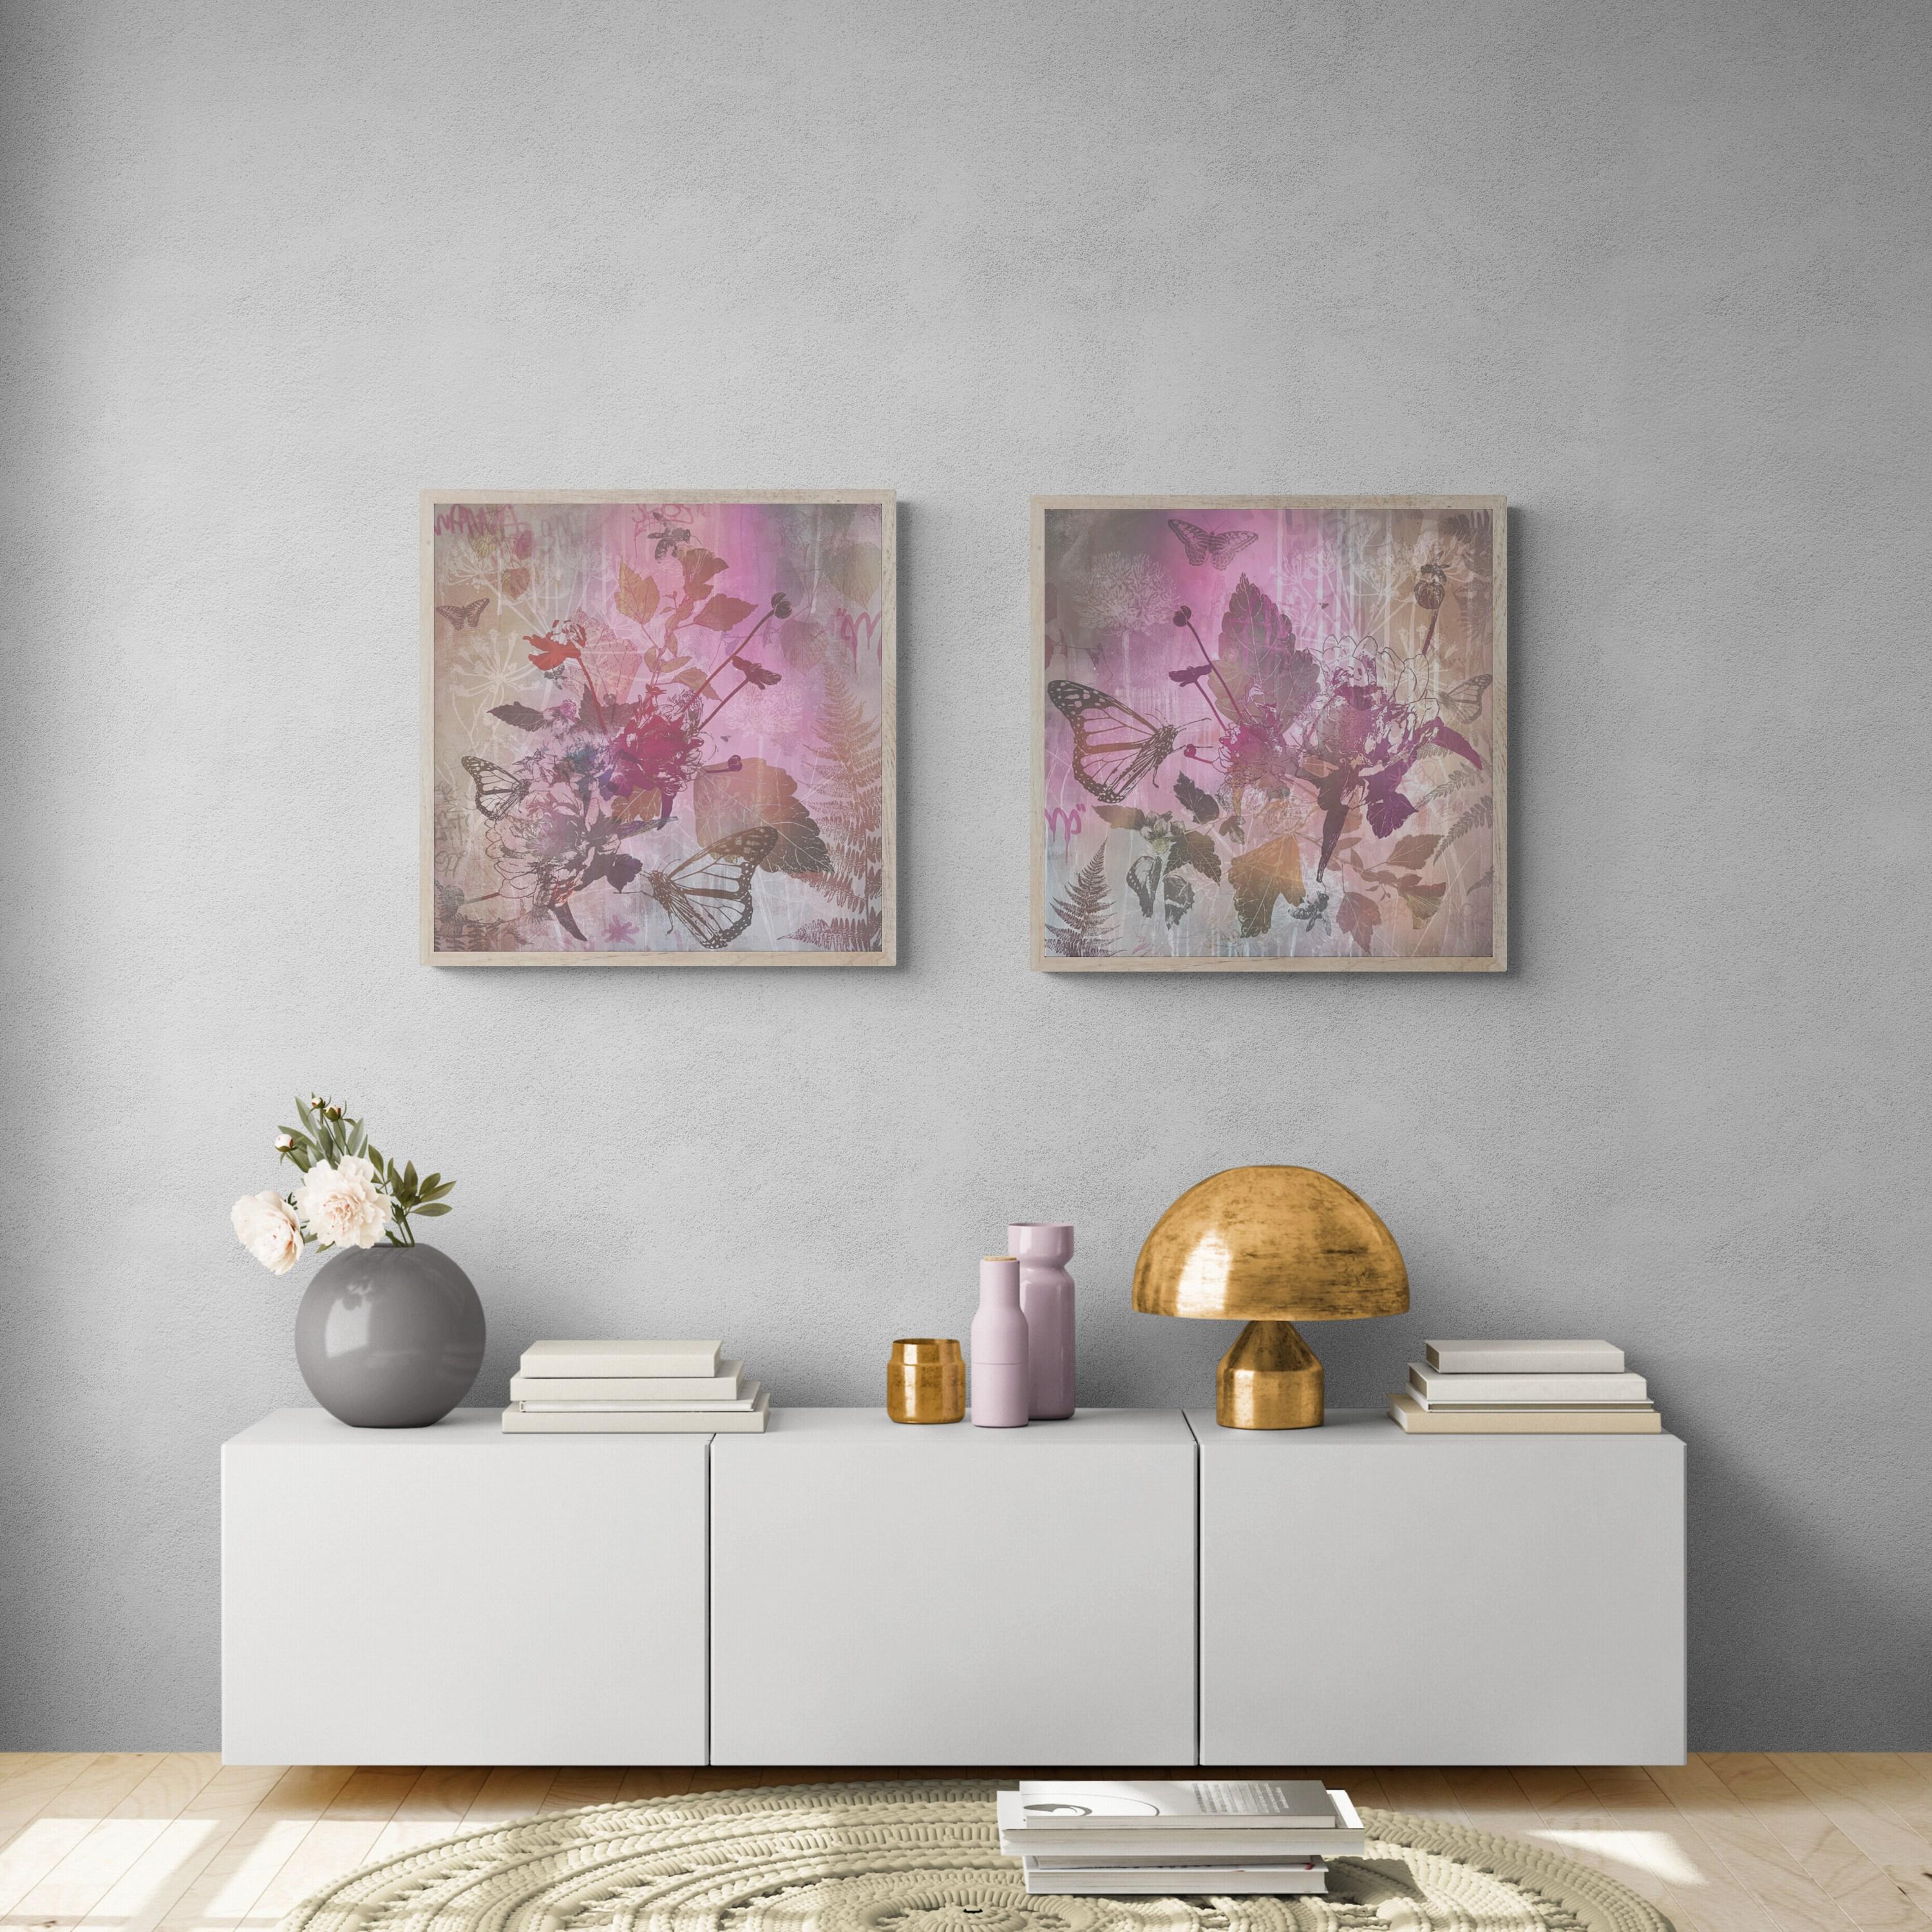 Morning Glory Diptych (Bees, Birch Panel, Botanicals, Butterflies, Floral, Gold) For Sale 3